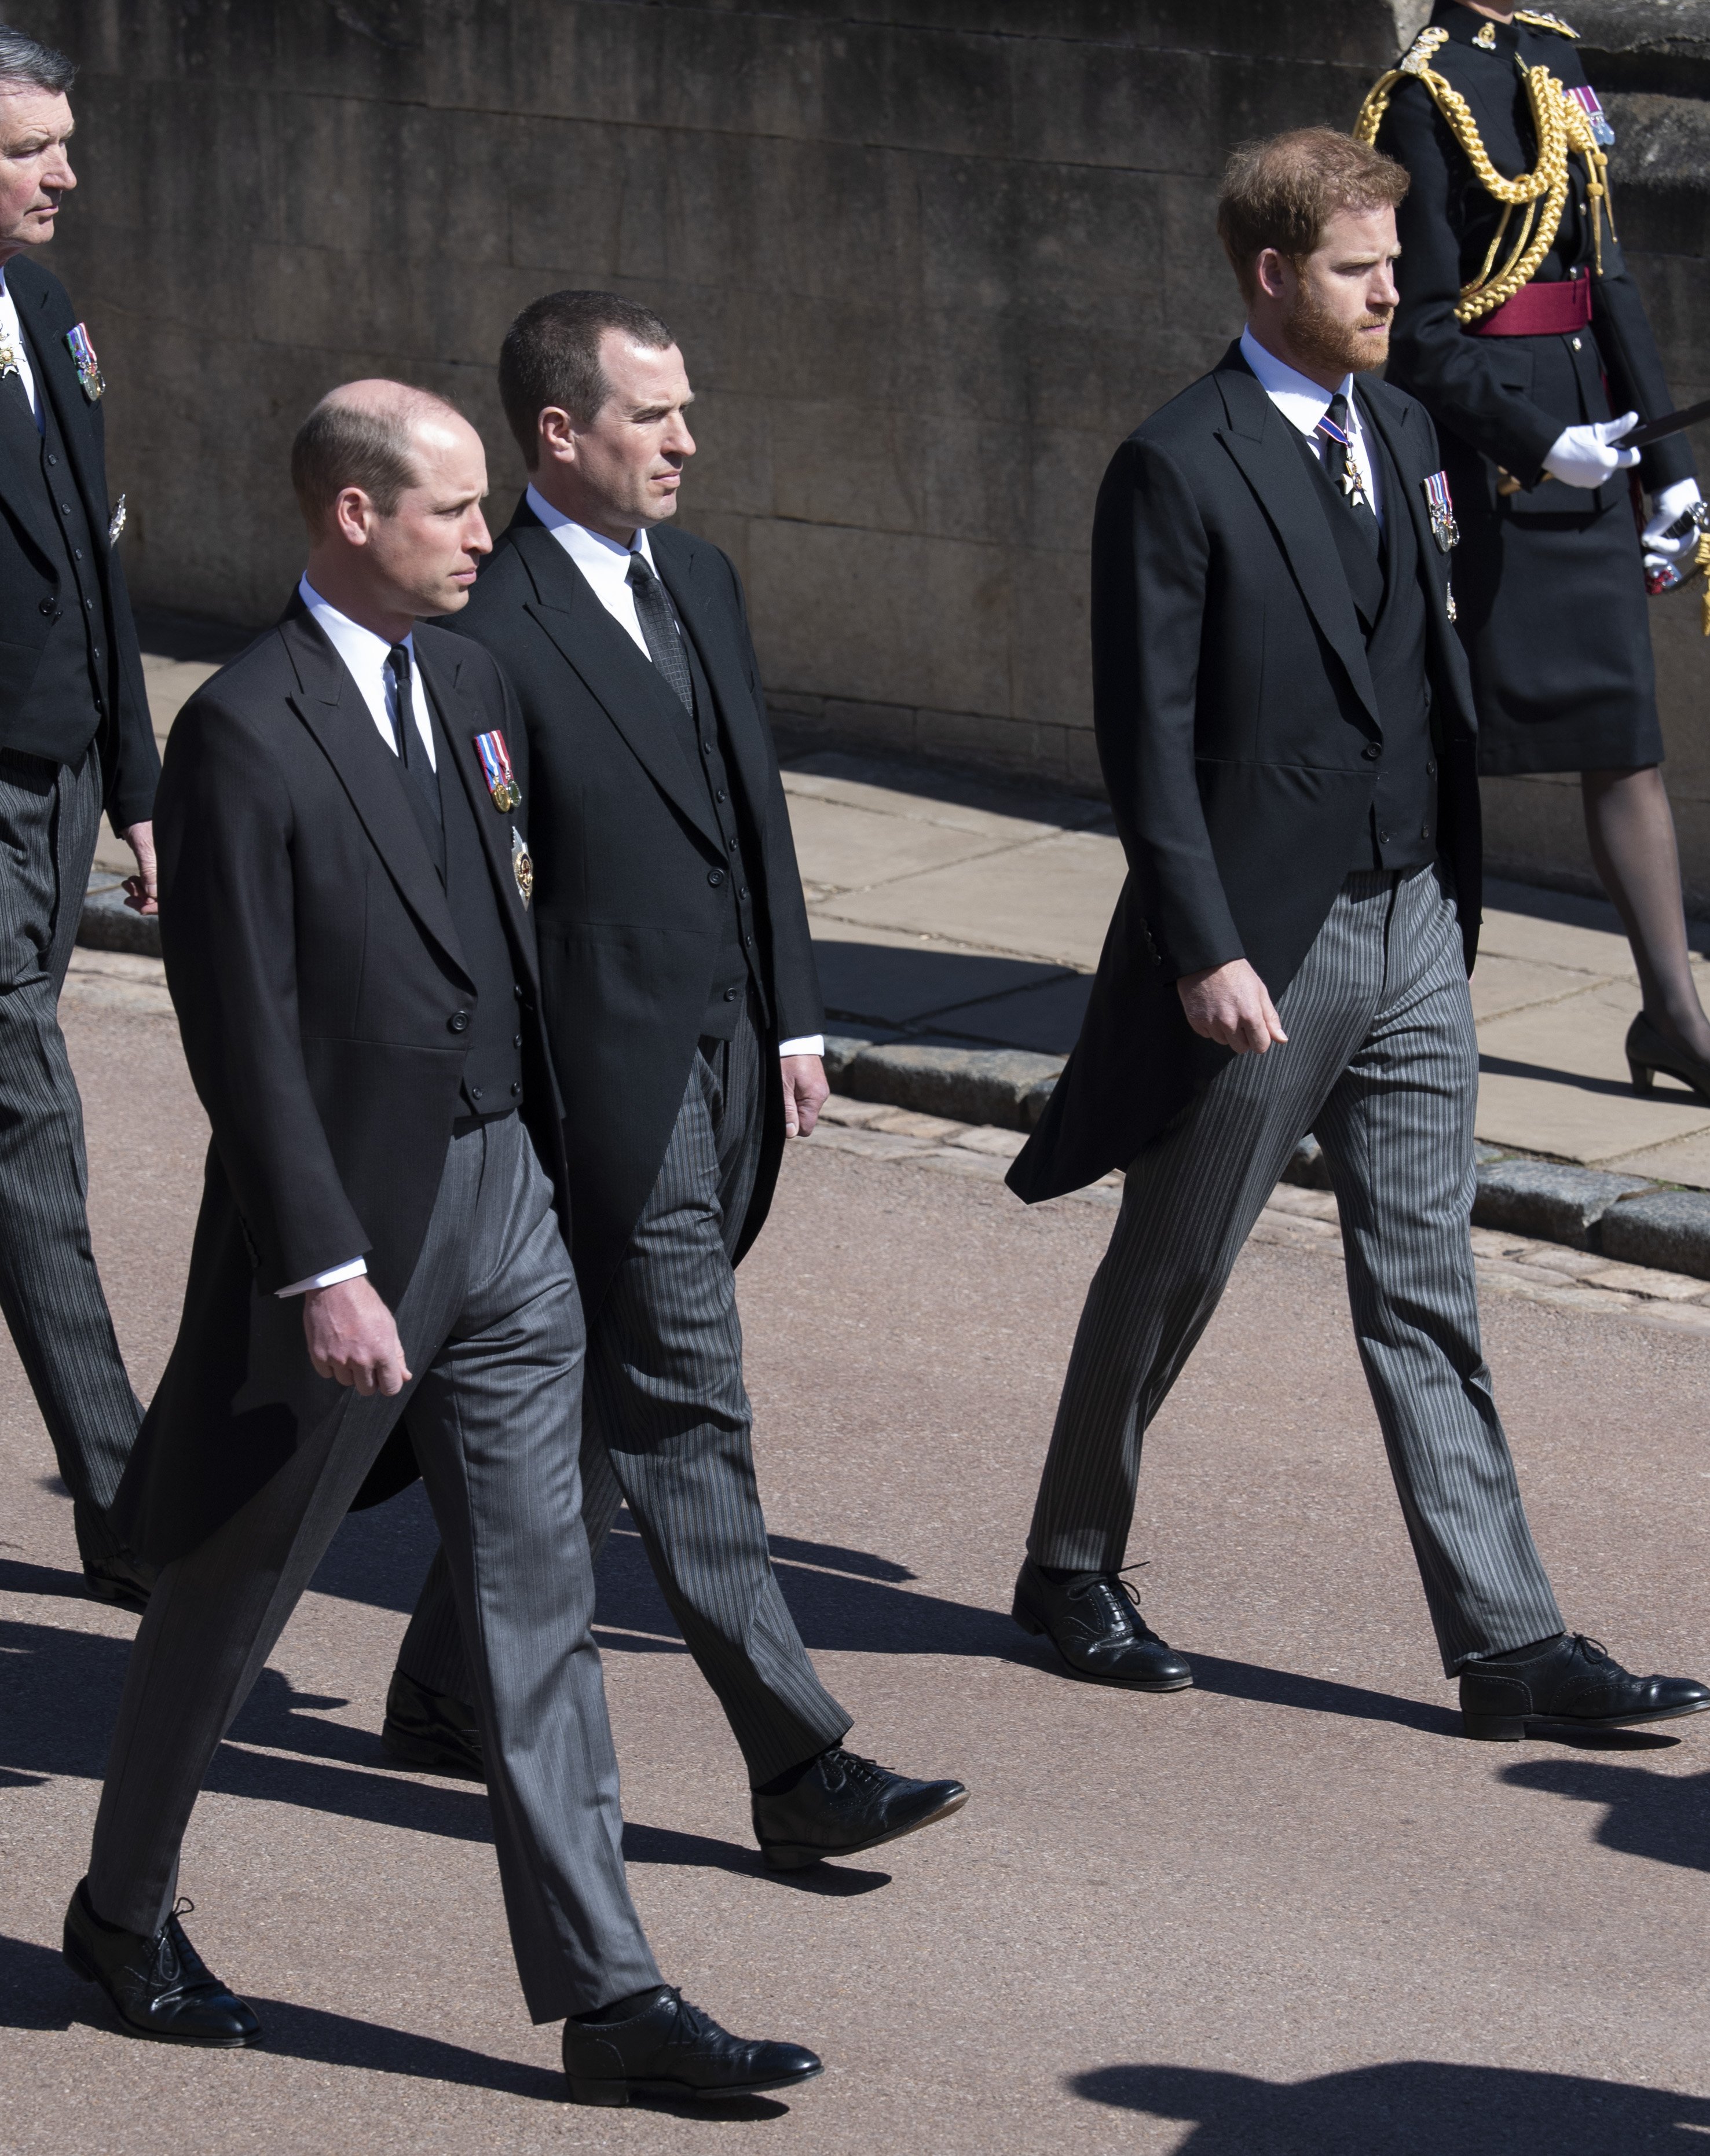 Prince William, Duke of Cambridge, Peter Phillips and Prince Harry during the funeral of Prince Philip, Duke of Edinburgh on April 17, 2021 in Windsor, England | Source: Getty Images 